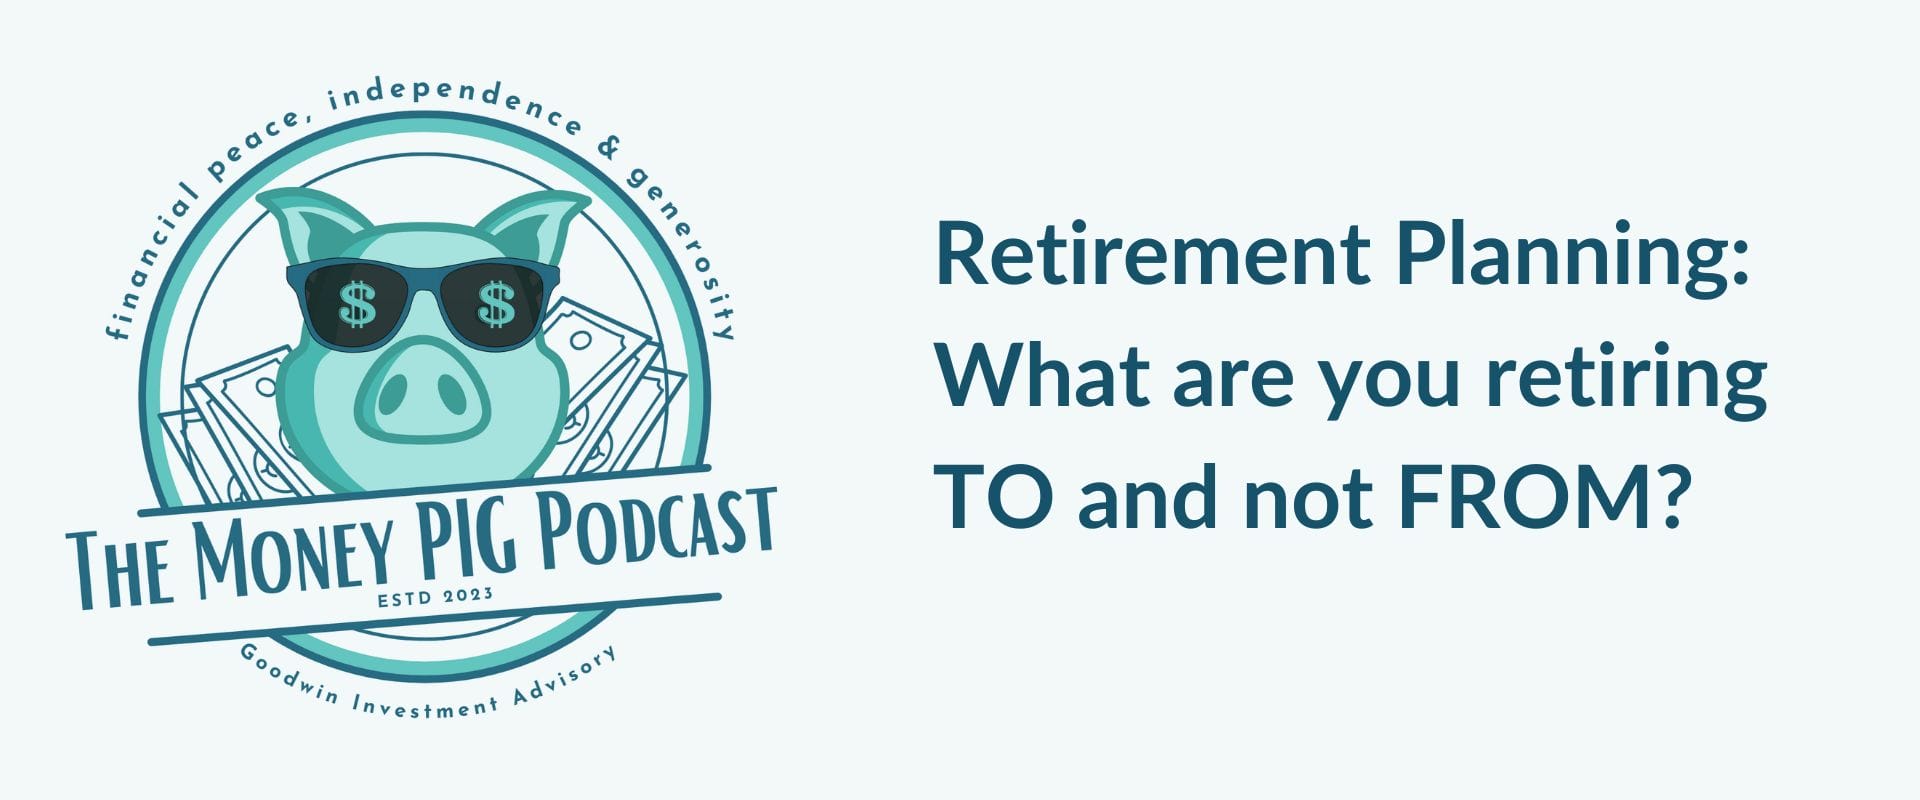 Retirement Planning What are you retiring TO and not FROM